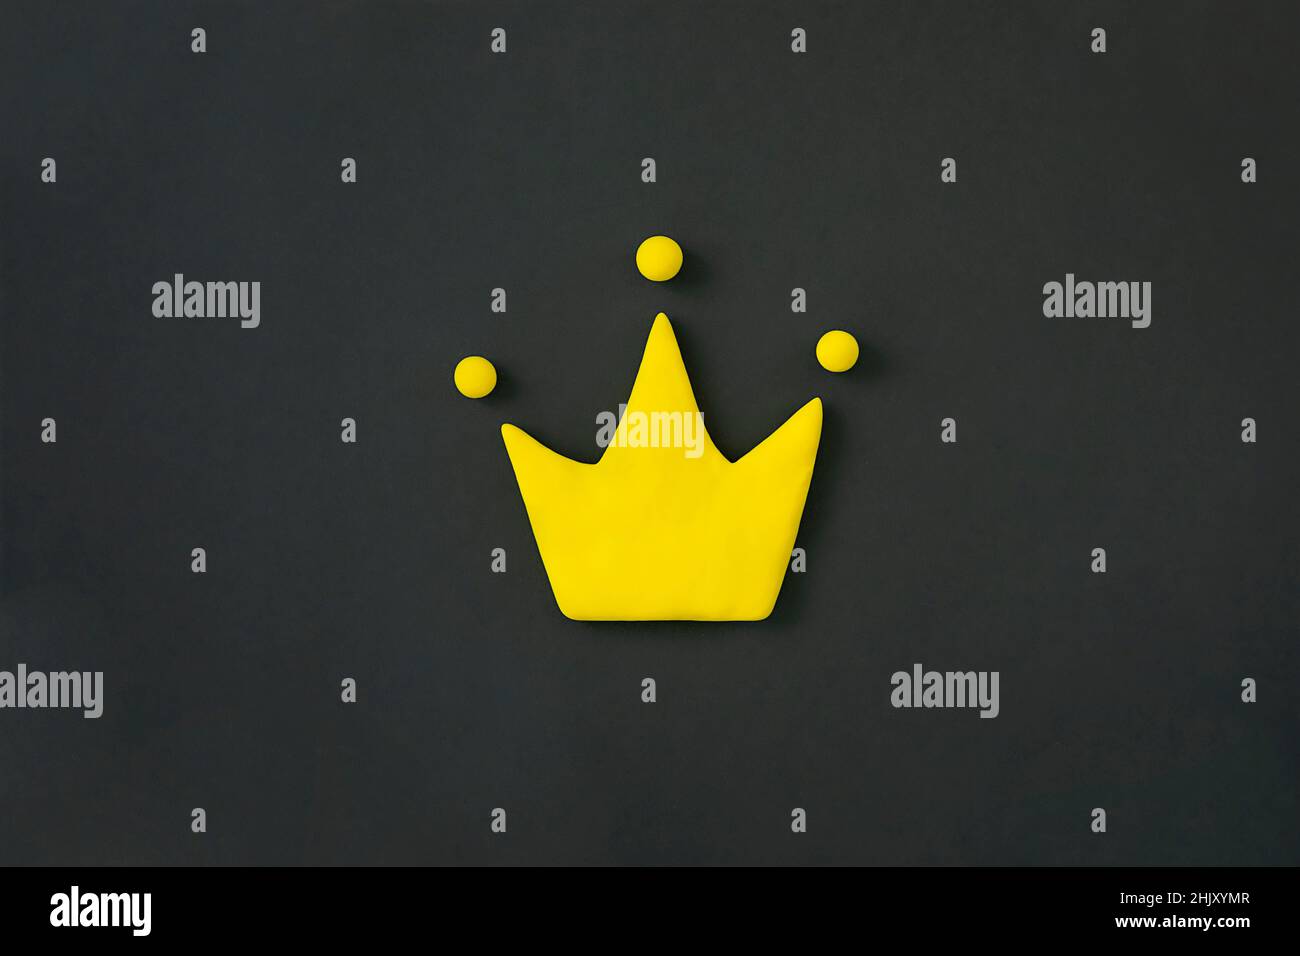 Simple 3d yellow crown symbol on black background. Concept of win and success, top rank quality status. Stock Photo